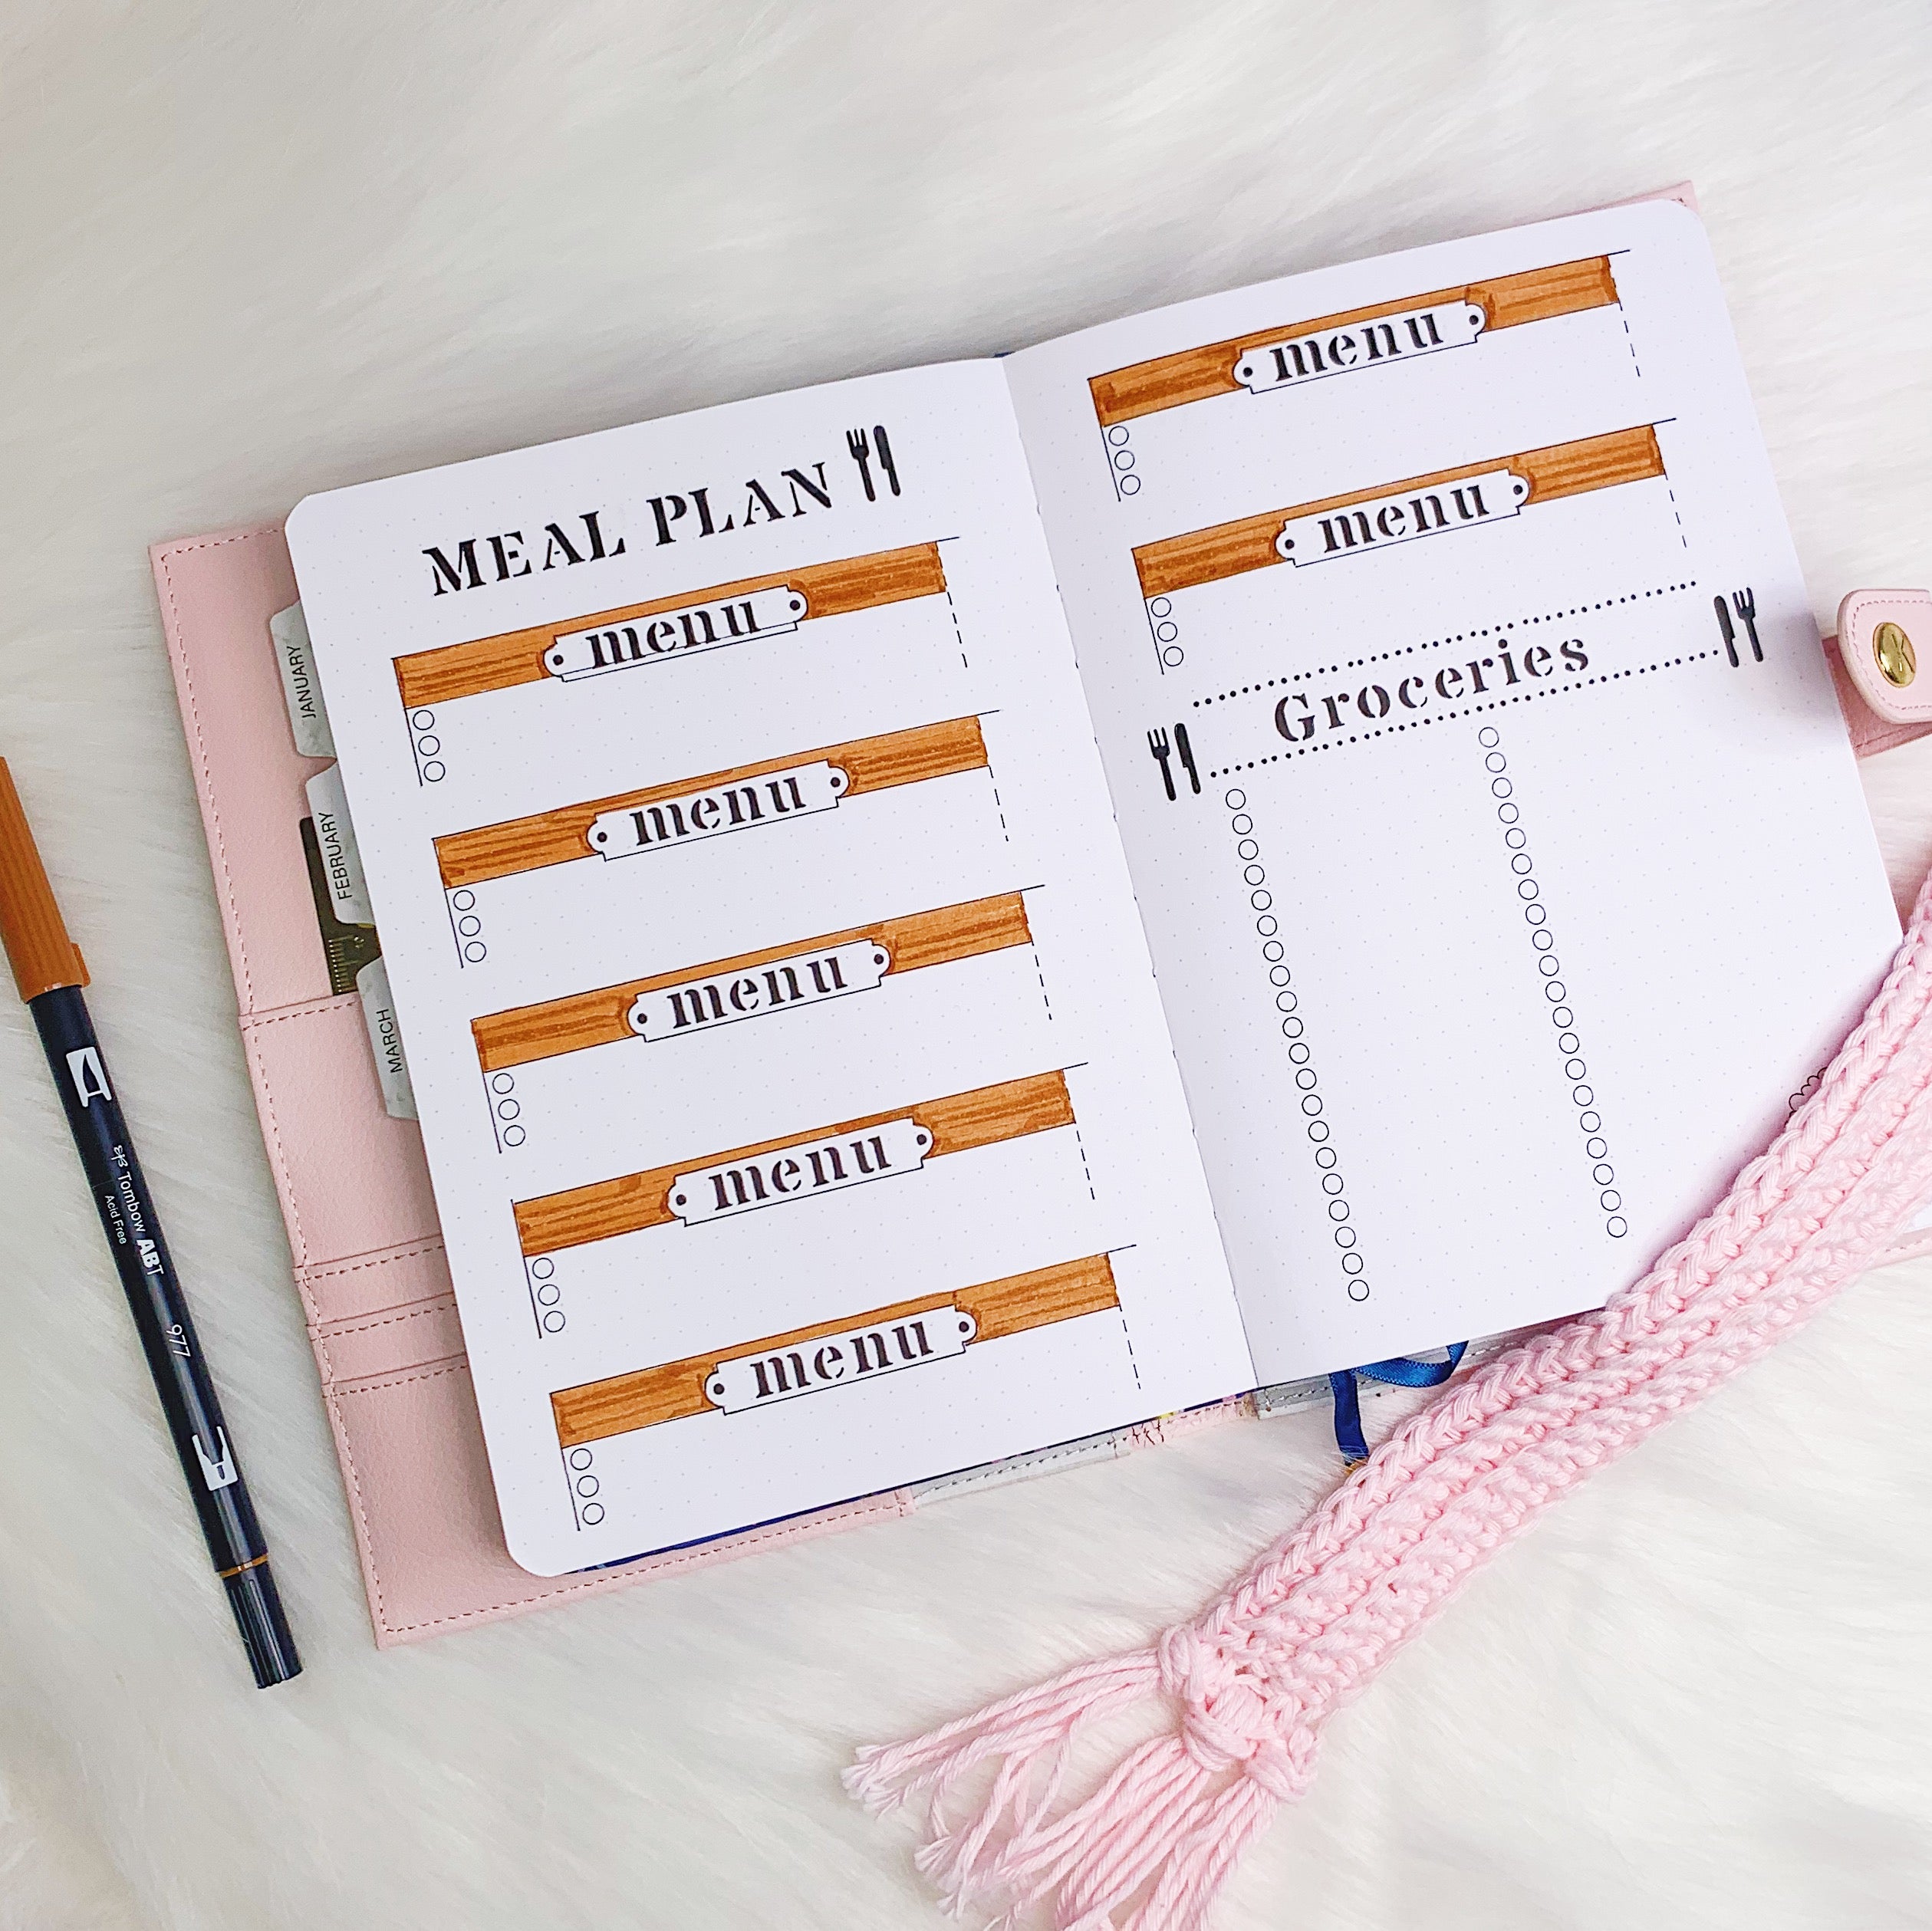 12 Bullet Journal Ideas to Inspire Your Layouts